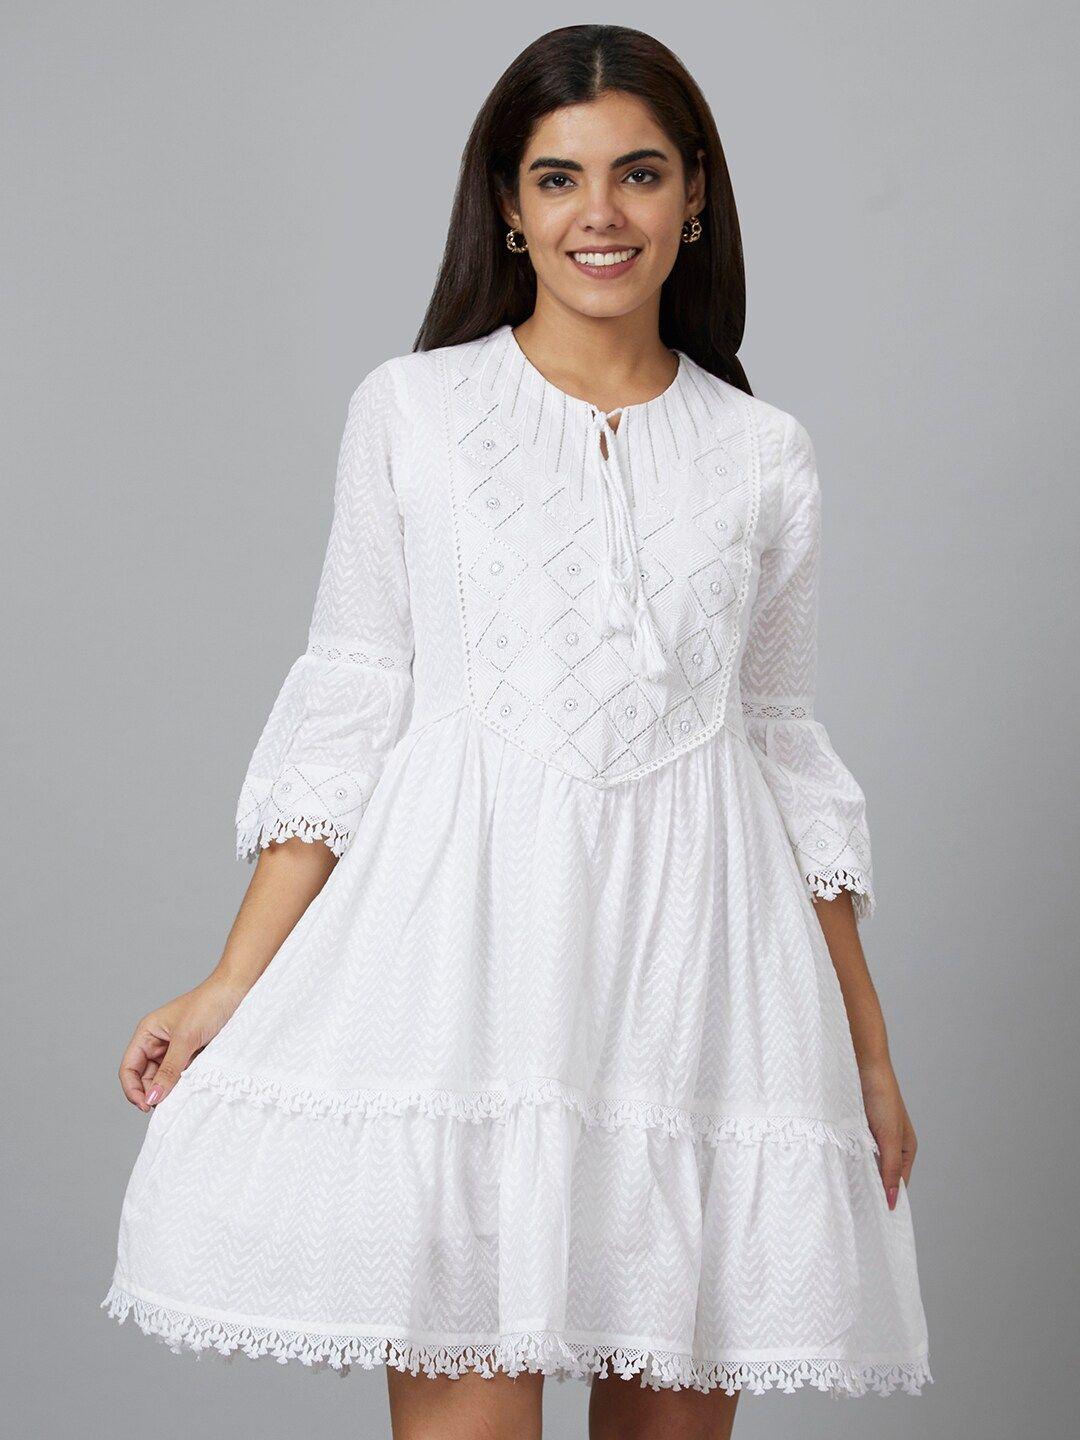 globus off white self design tie-up neck bell sleeve pure cotton fit & flare dress